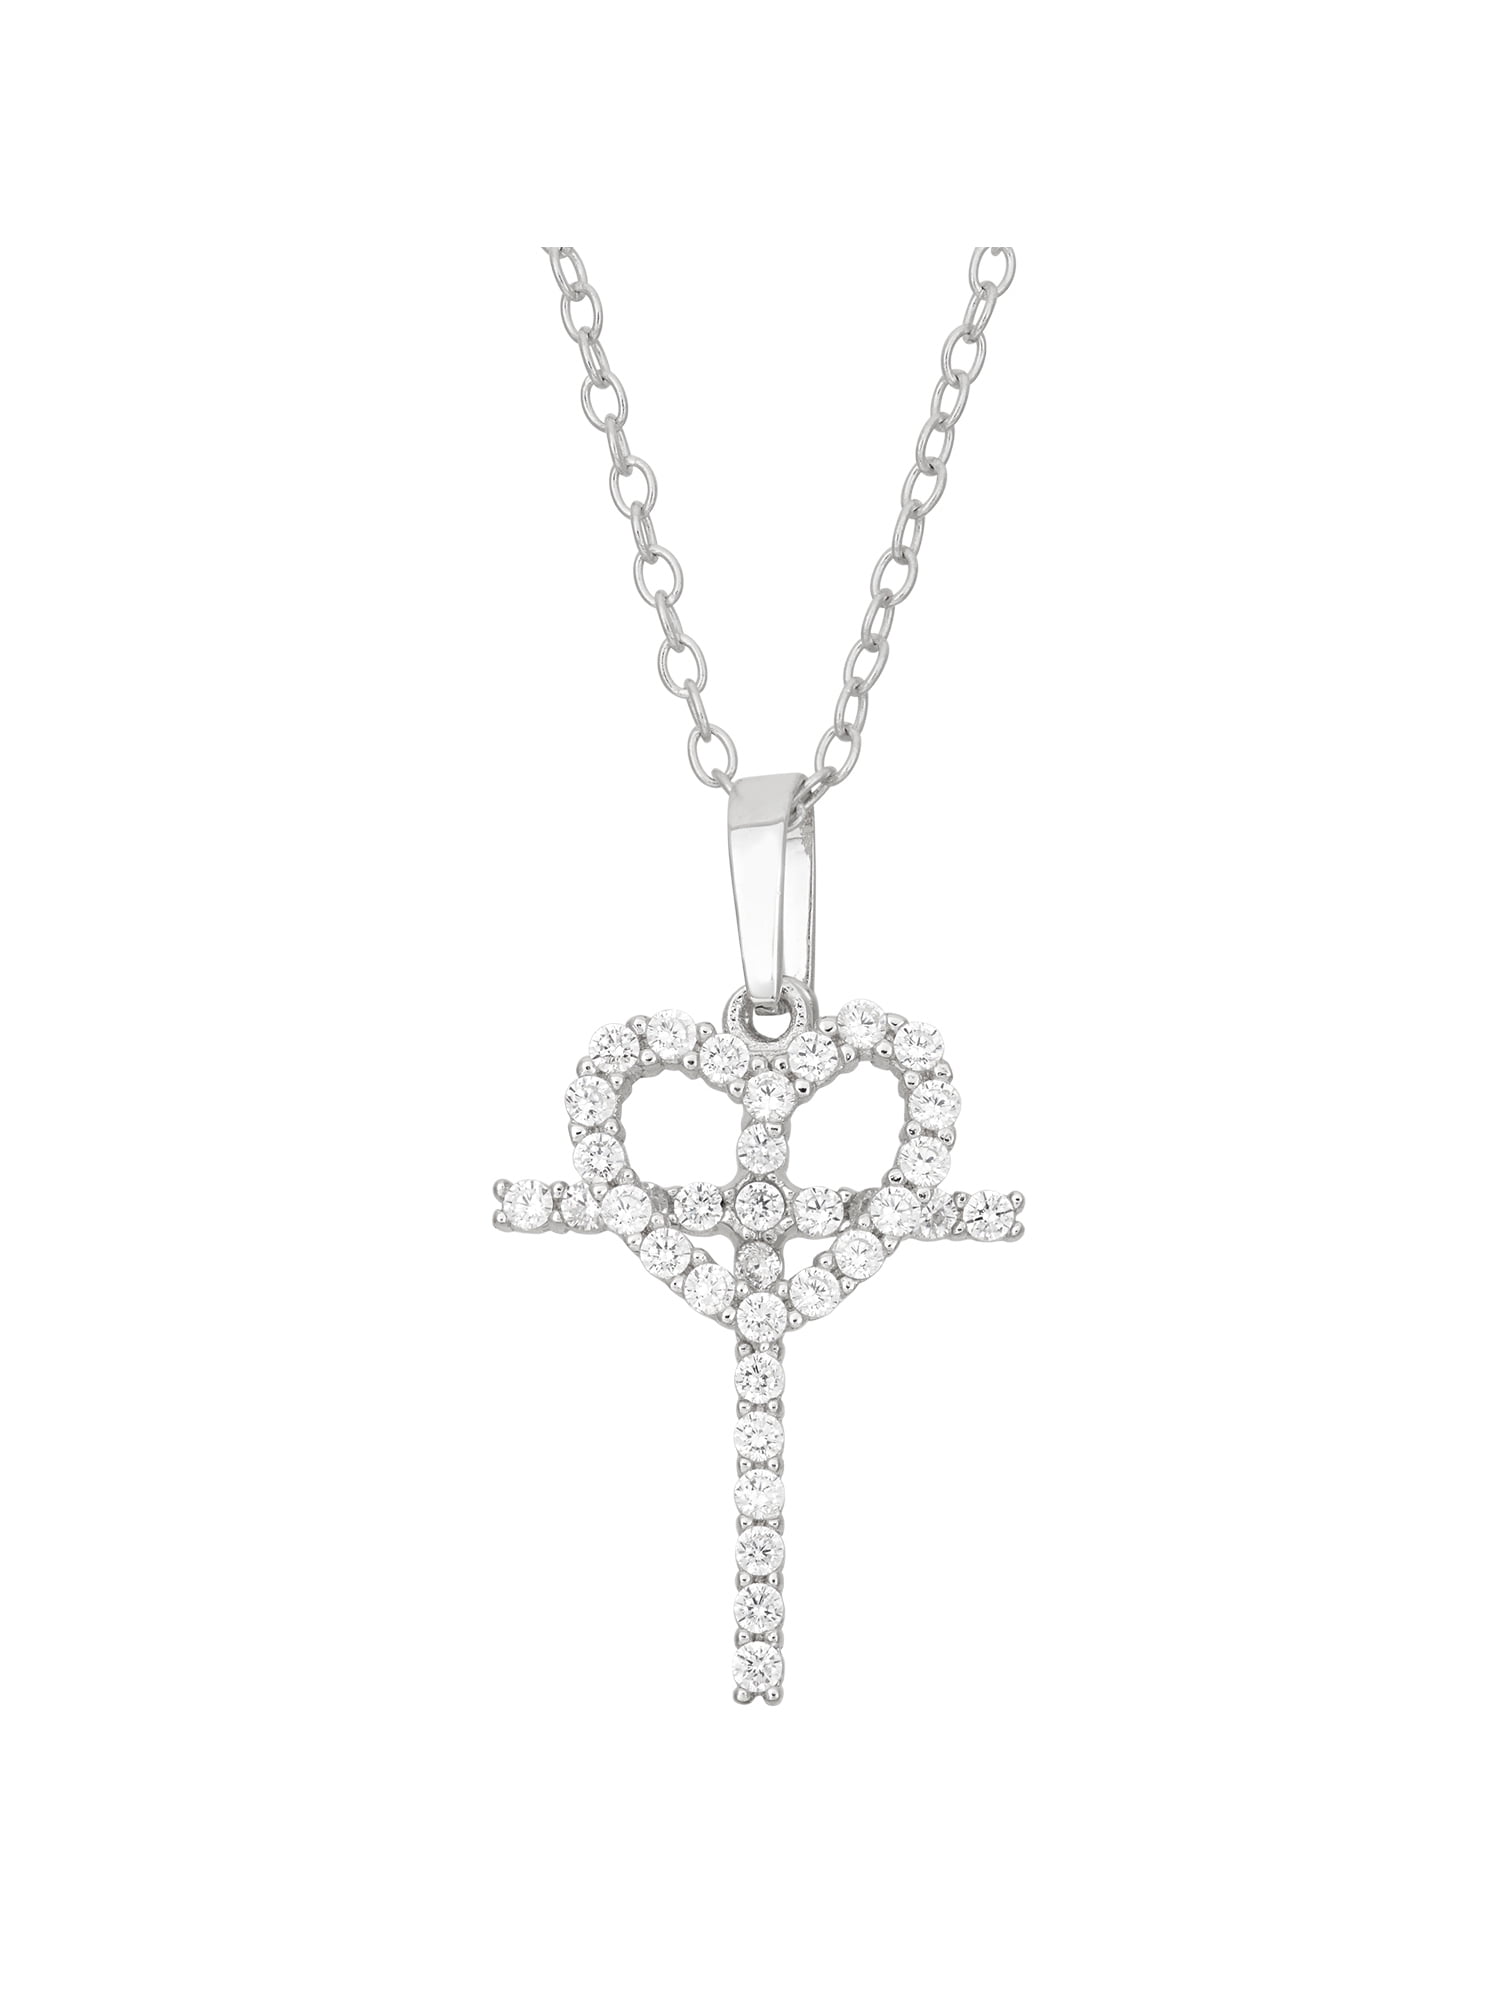 CZ Sterling Silver Open Heart and Cross Pendant, 16